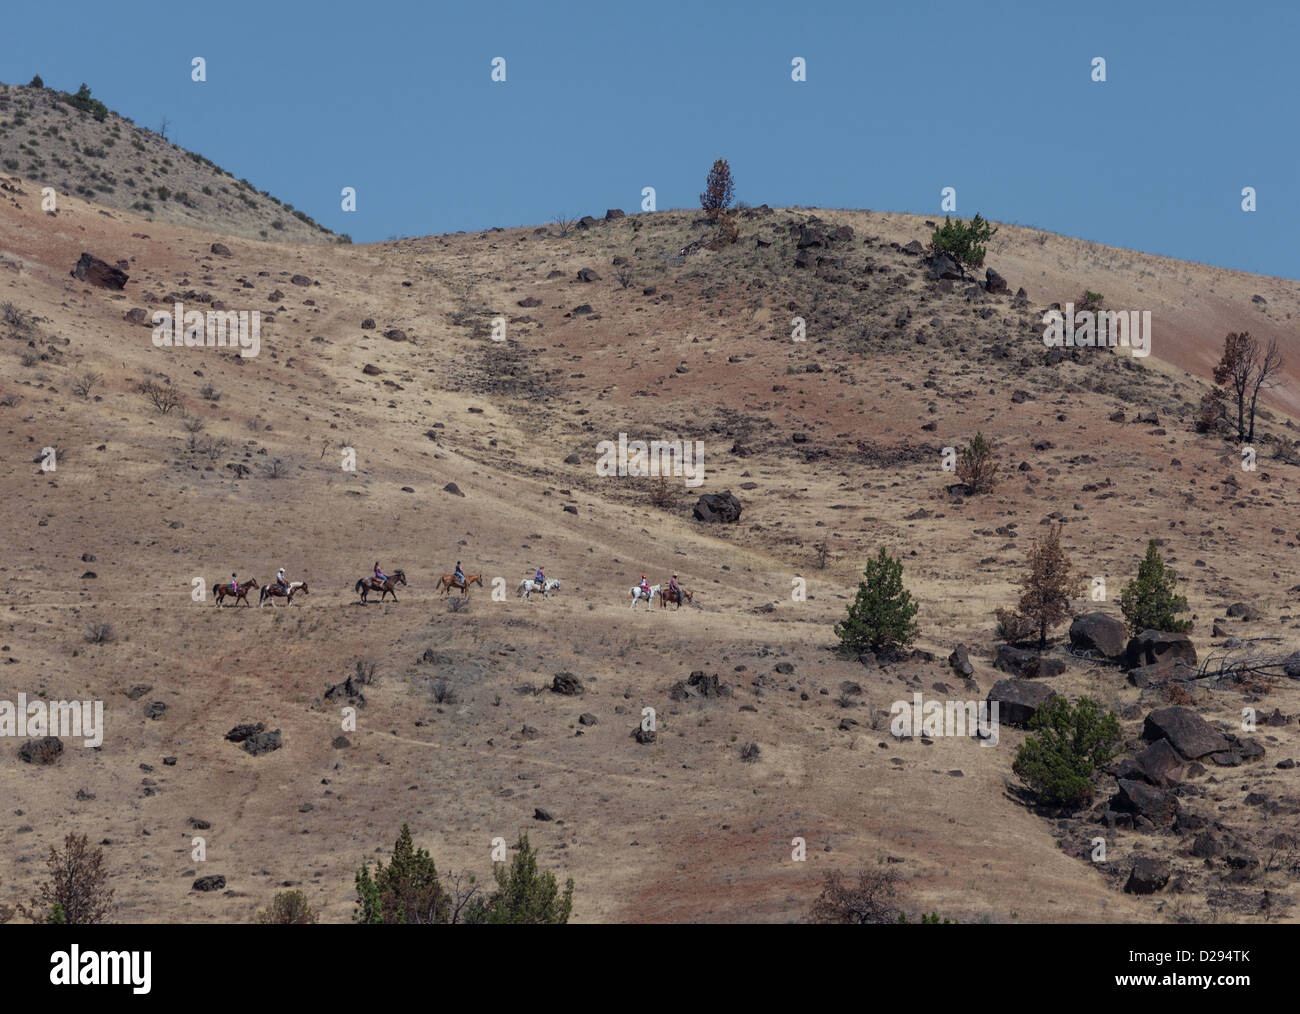 Trail riding in desert with a line of horse riders in the desert, Kah-Nee-Ta, near Warm Springs, Oregon USA Stock Photo